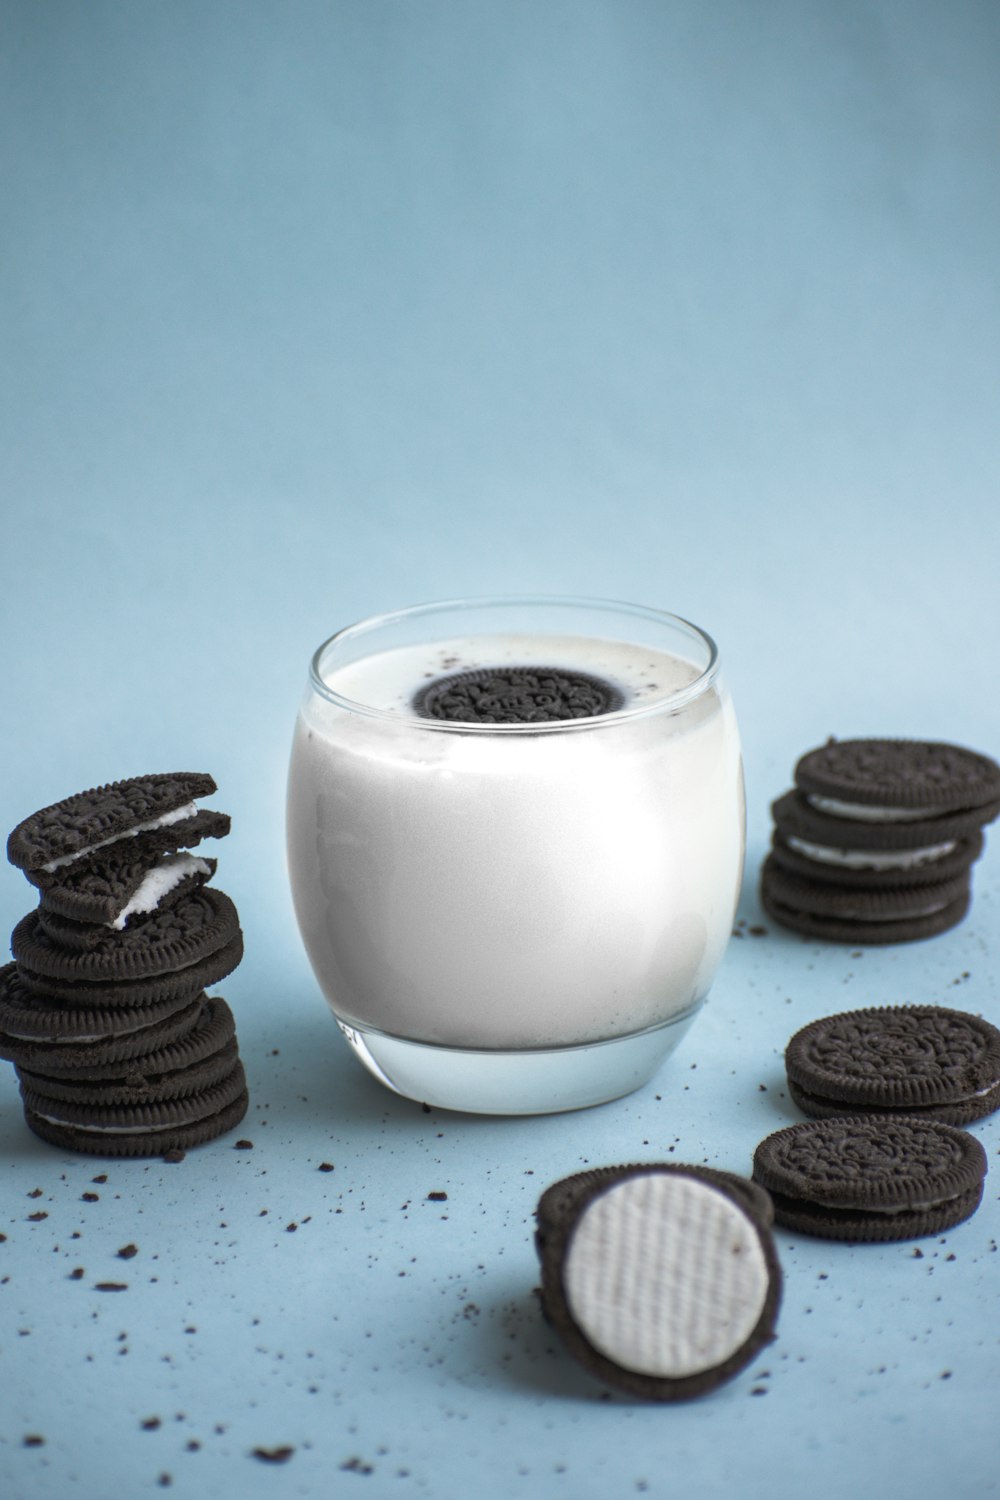 clear glass with milk and cookies